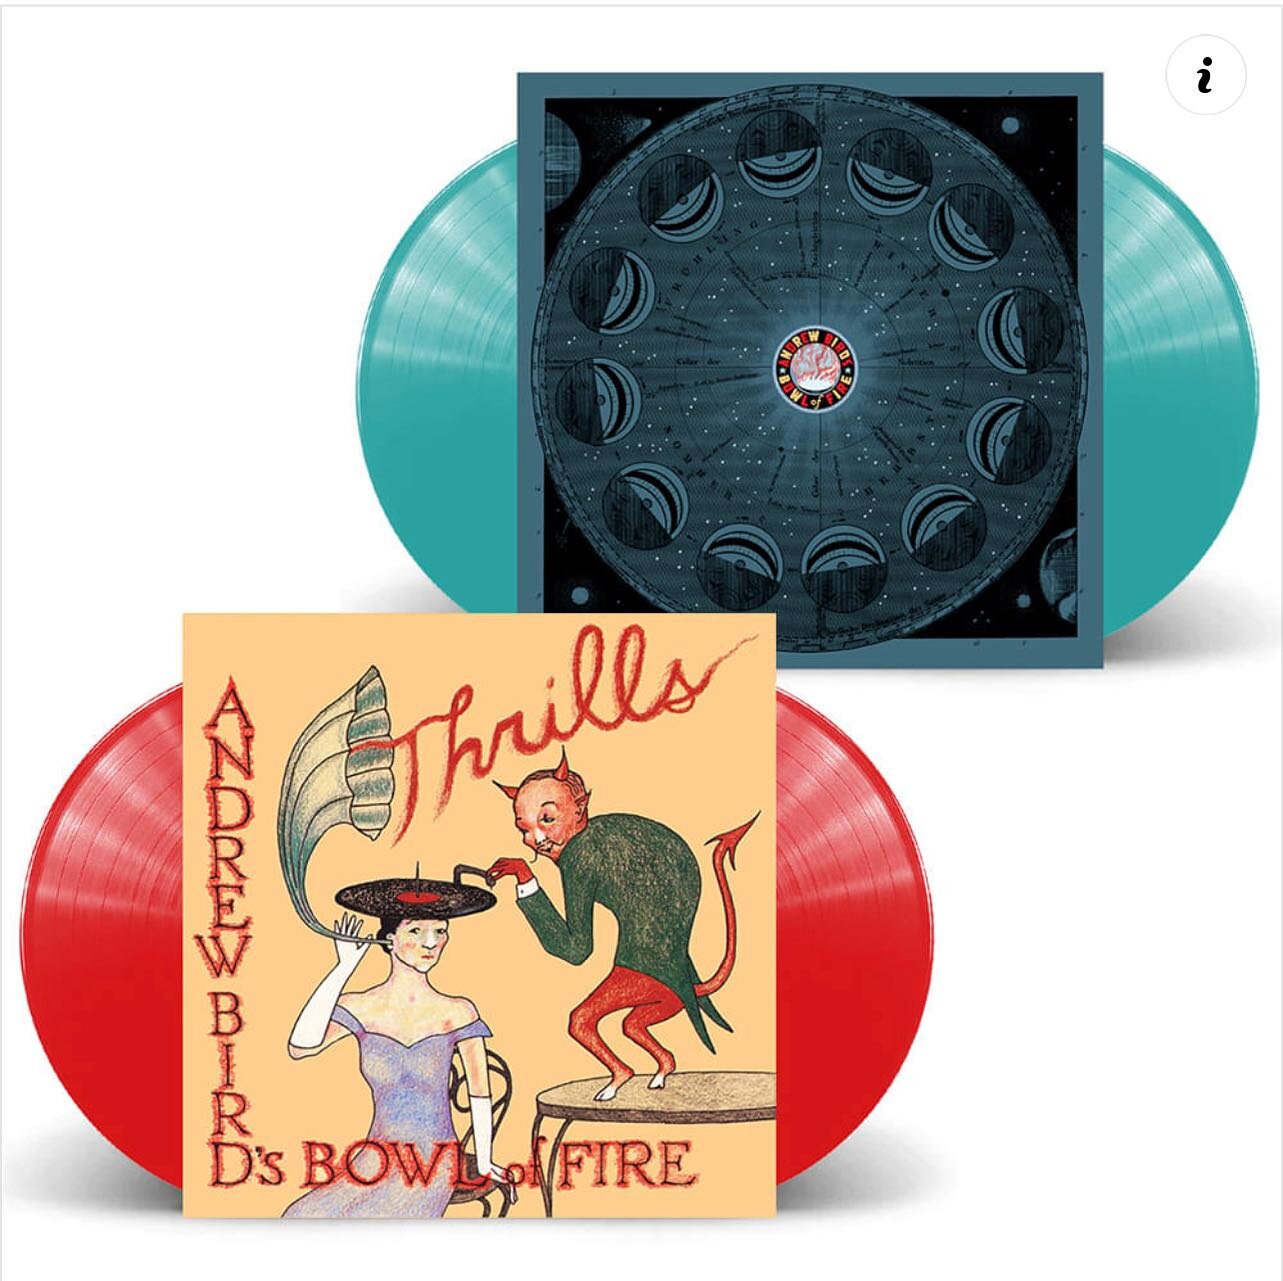 October 13th will mark the first ever vinyl release of &quot;Thrills&quot; &amp; &ldquo;Oh! The Grandeur&quot; from Andrew Bird's Bowl of Fire. Released between his solo career and tenure with Squirrel Nut Zippers, the albums show the group taking on